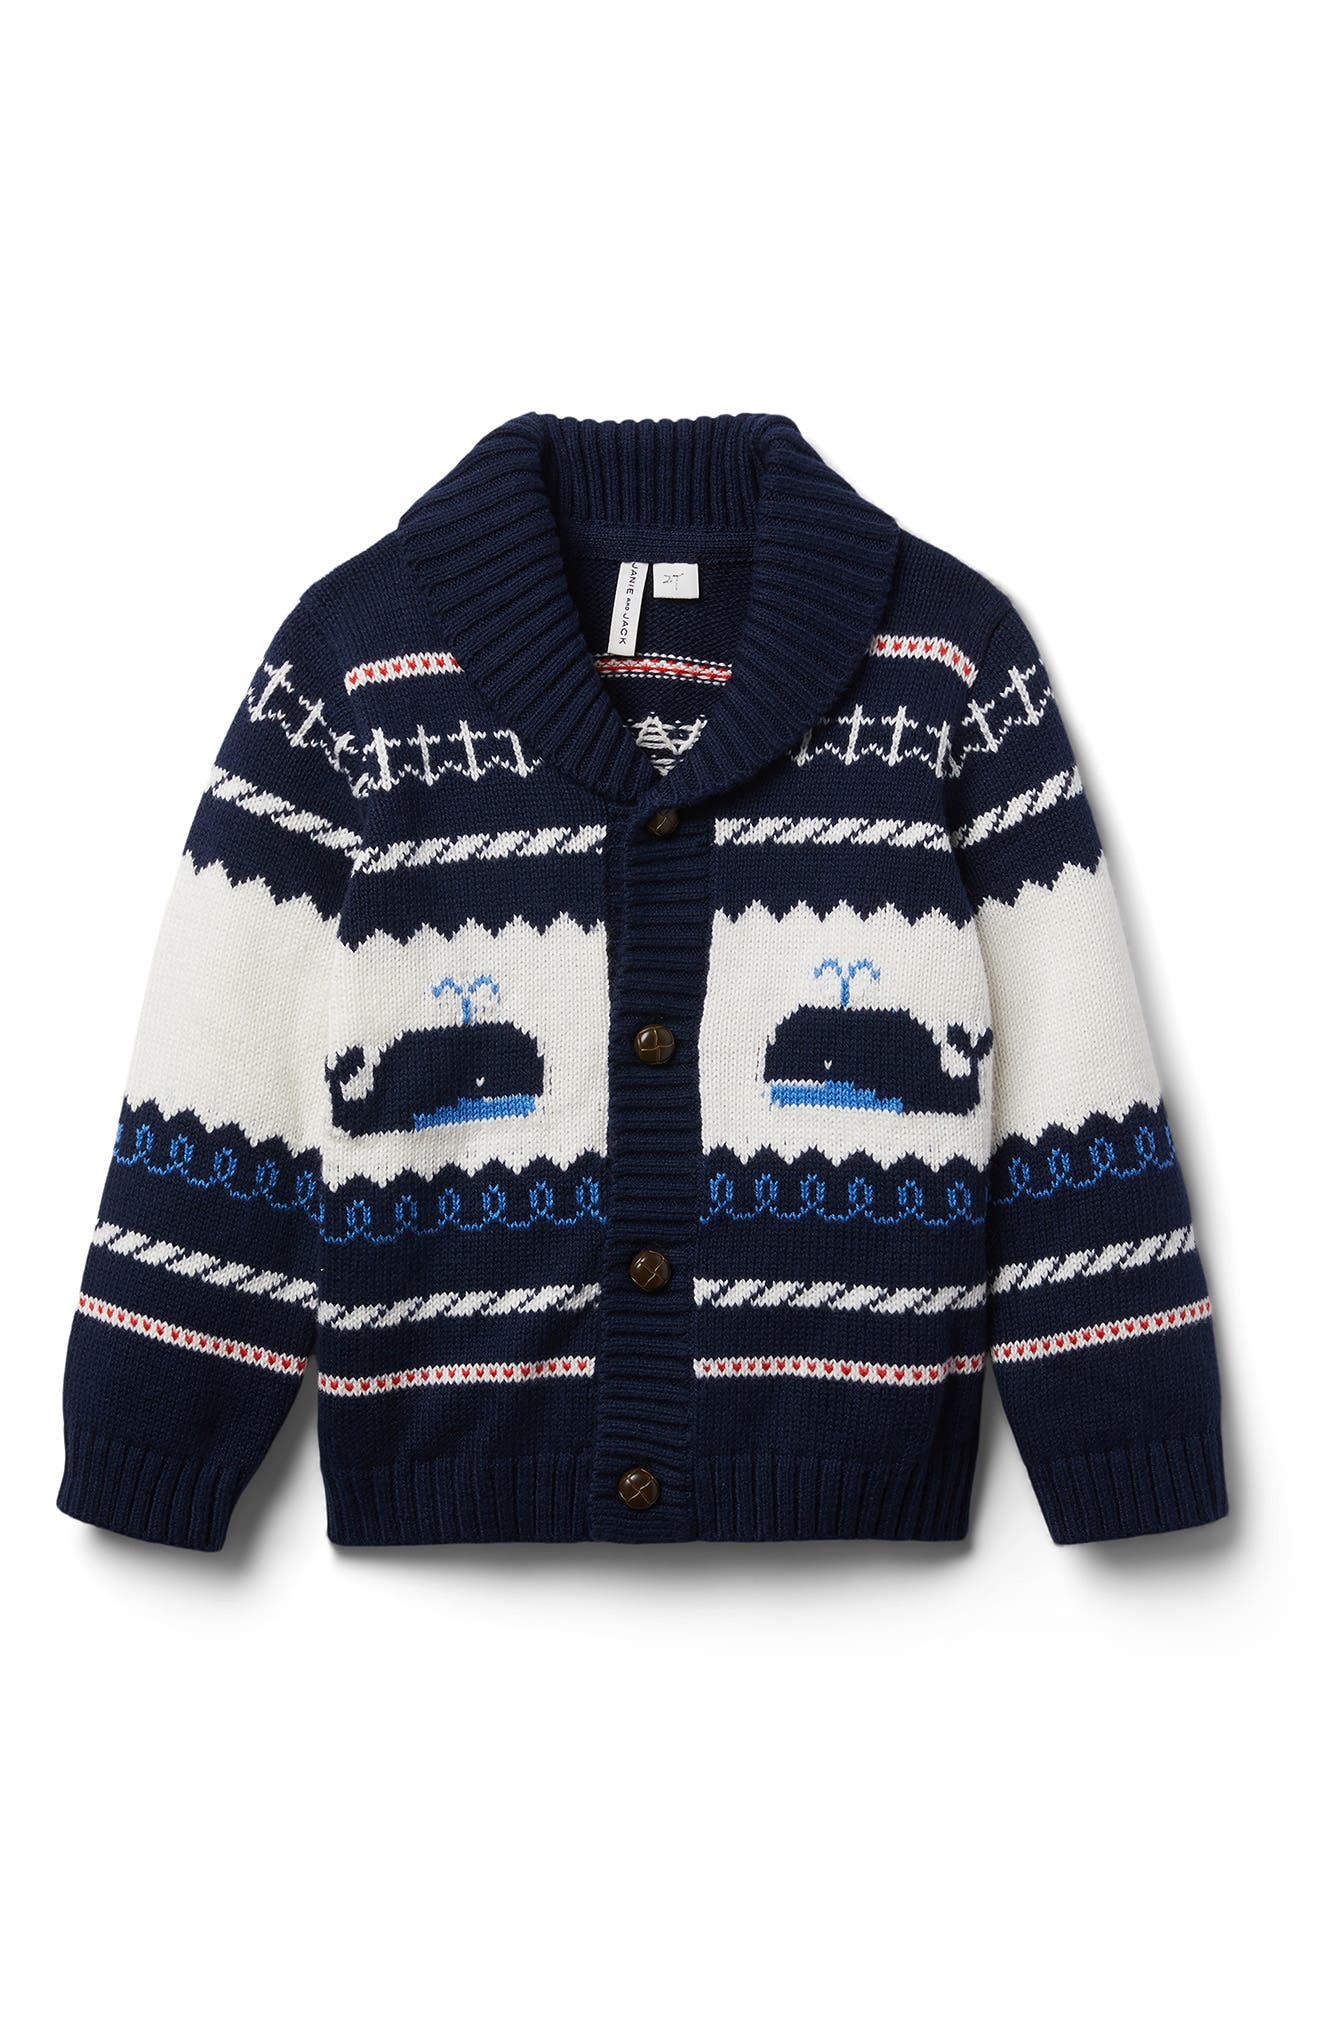 TONSEE Toddler Boys Girls Knitted Cardigan Button up Sweaters Cardigan Tops